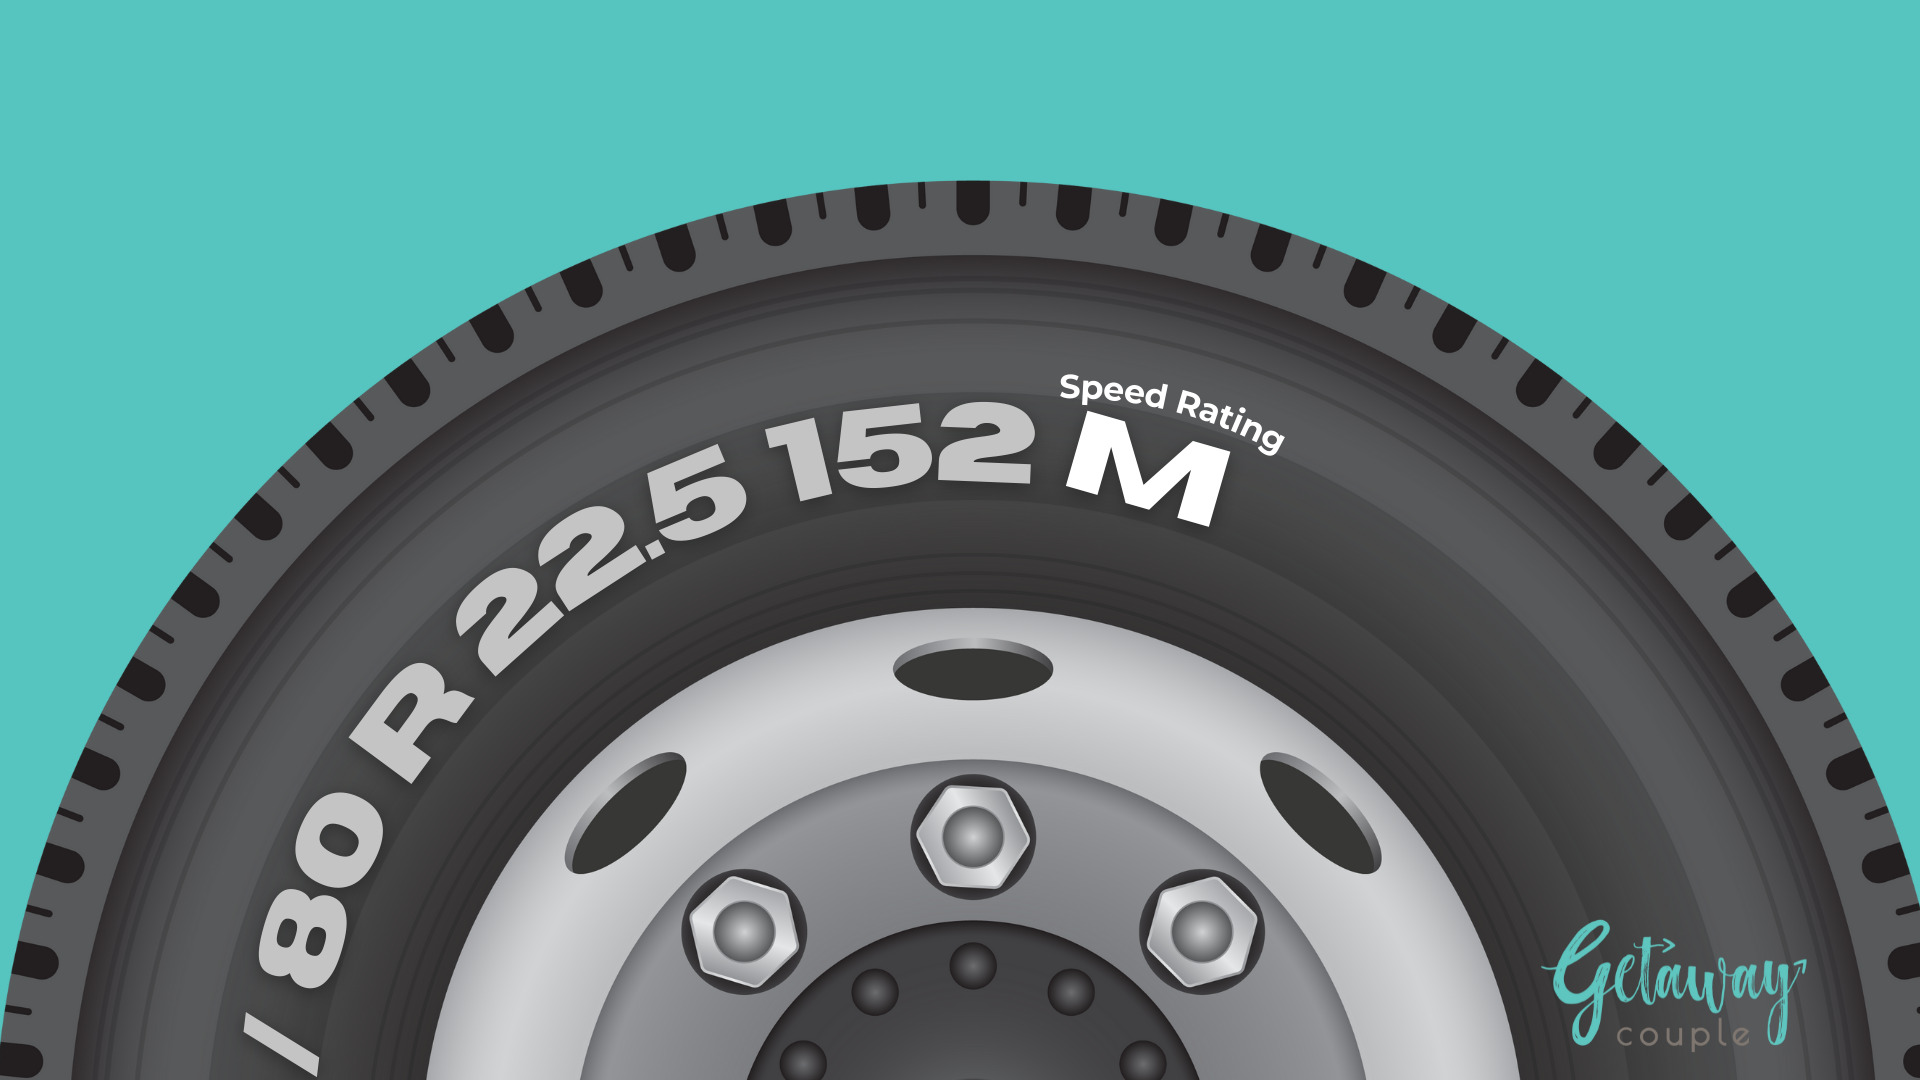 a standard passenger vehicle tires are required